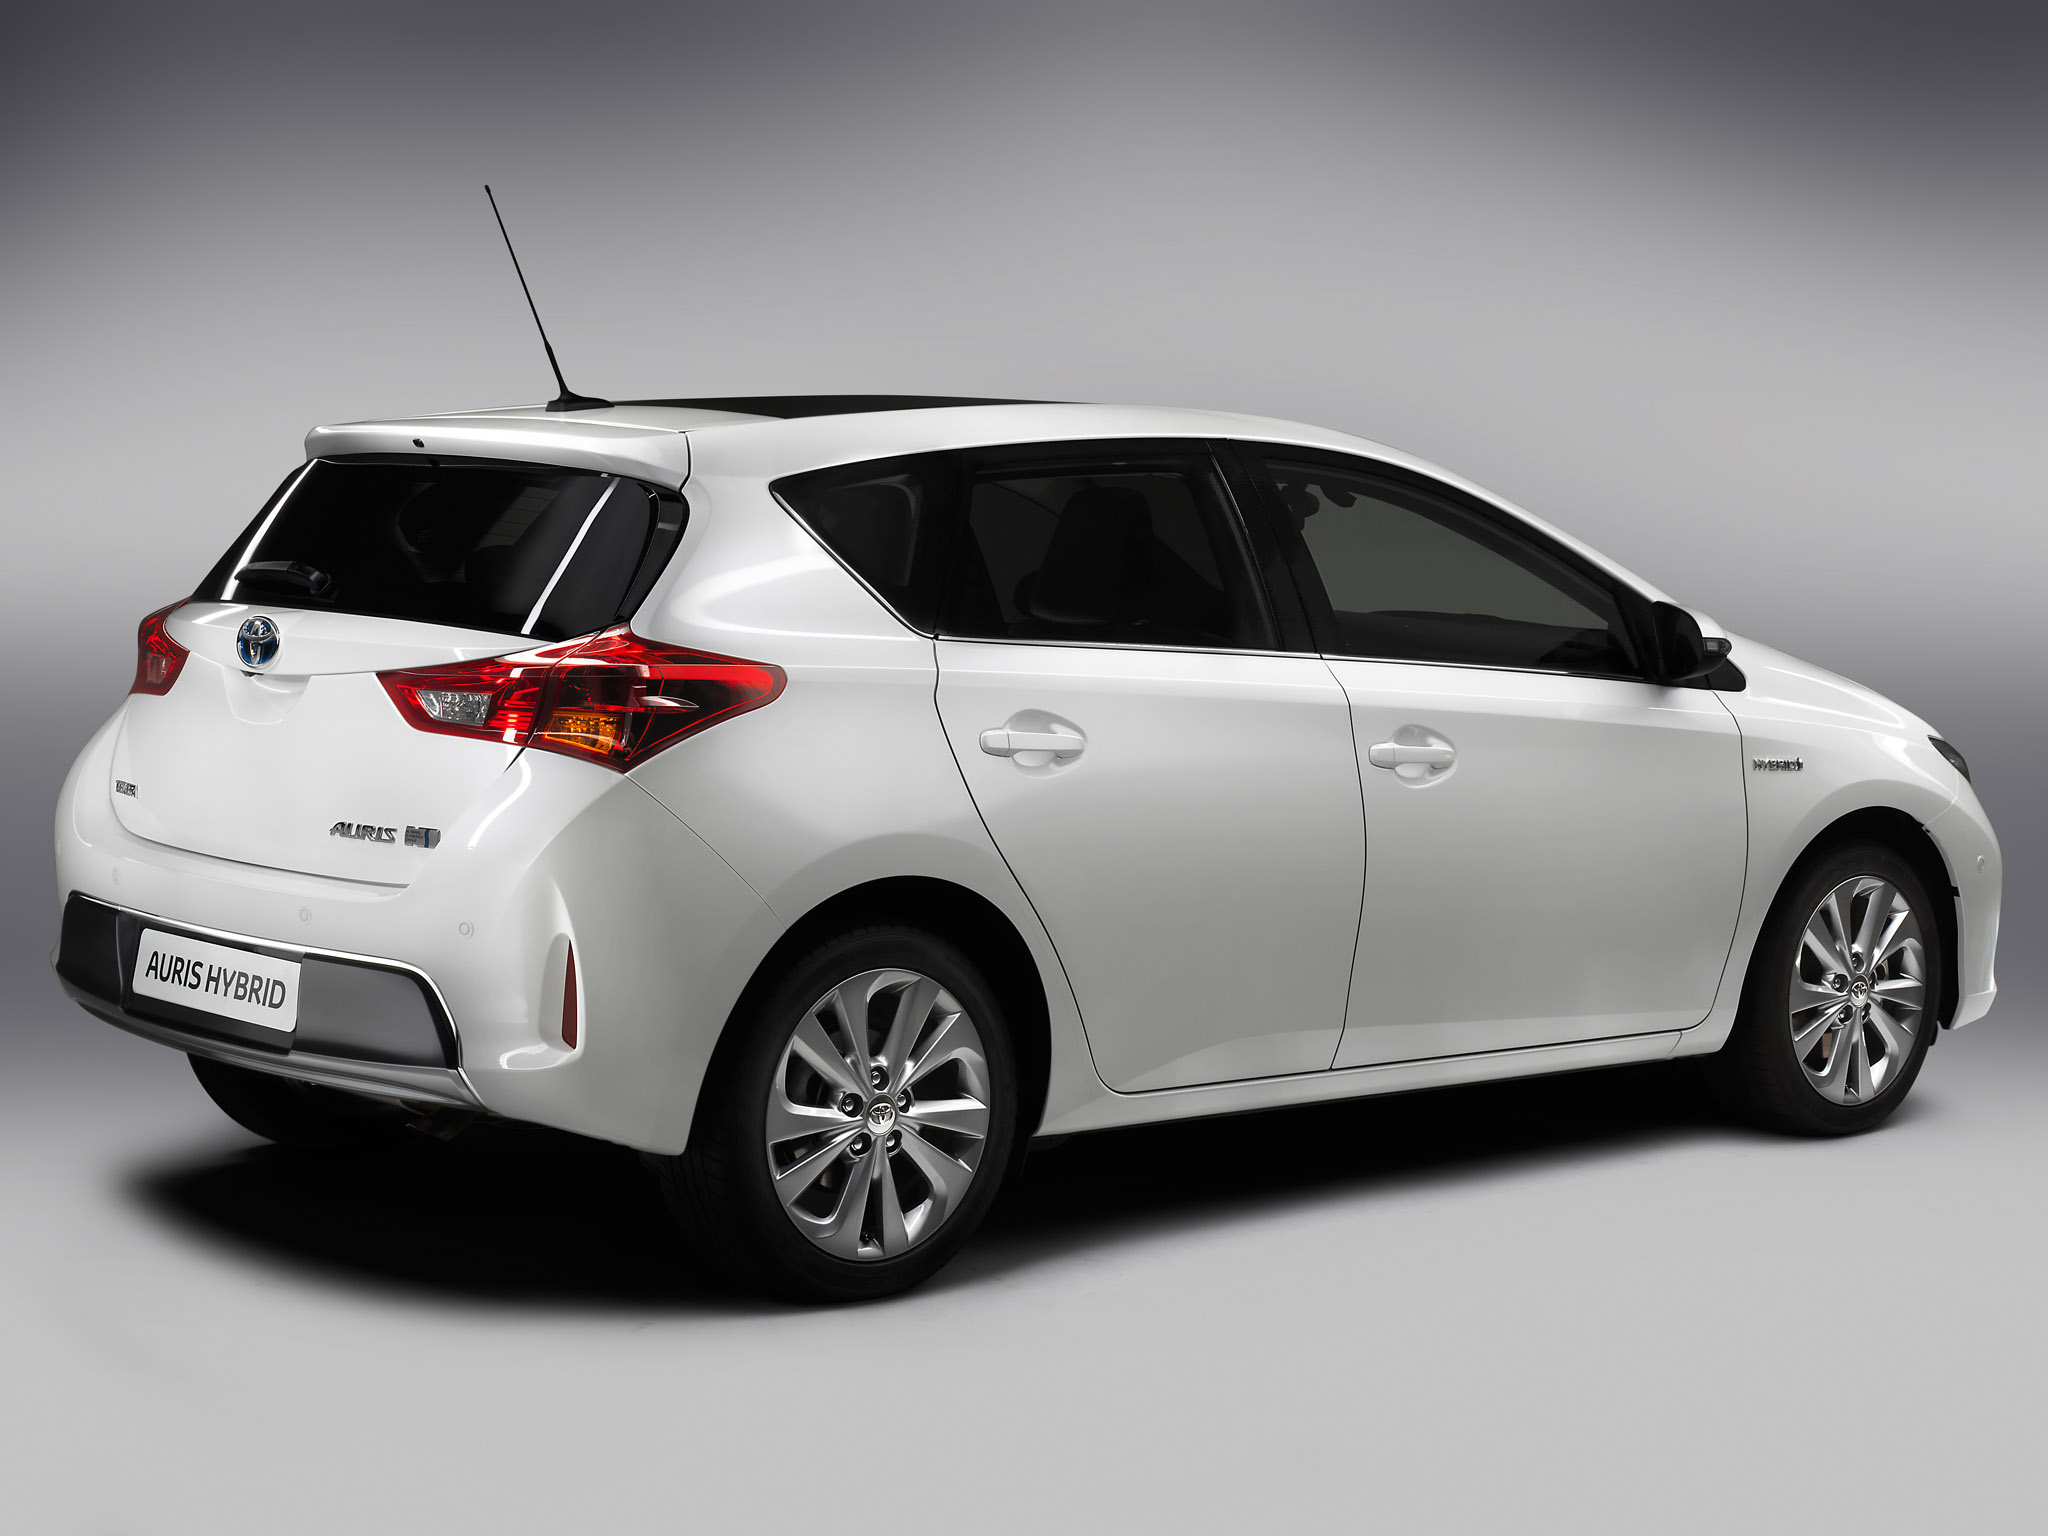 Car in pictures car photo gallery » Toyota Auris Hybrid